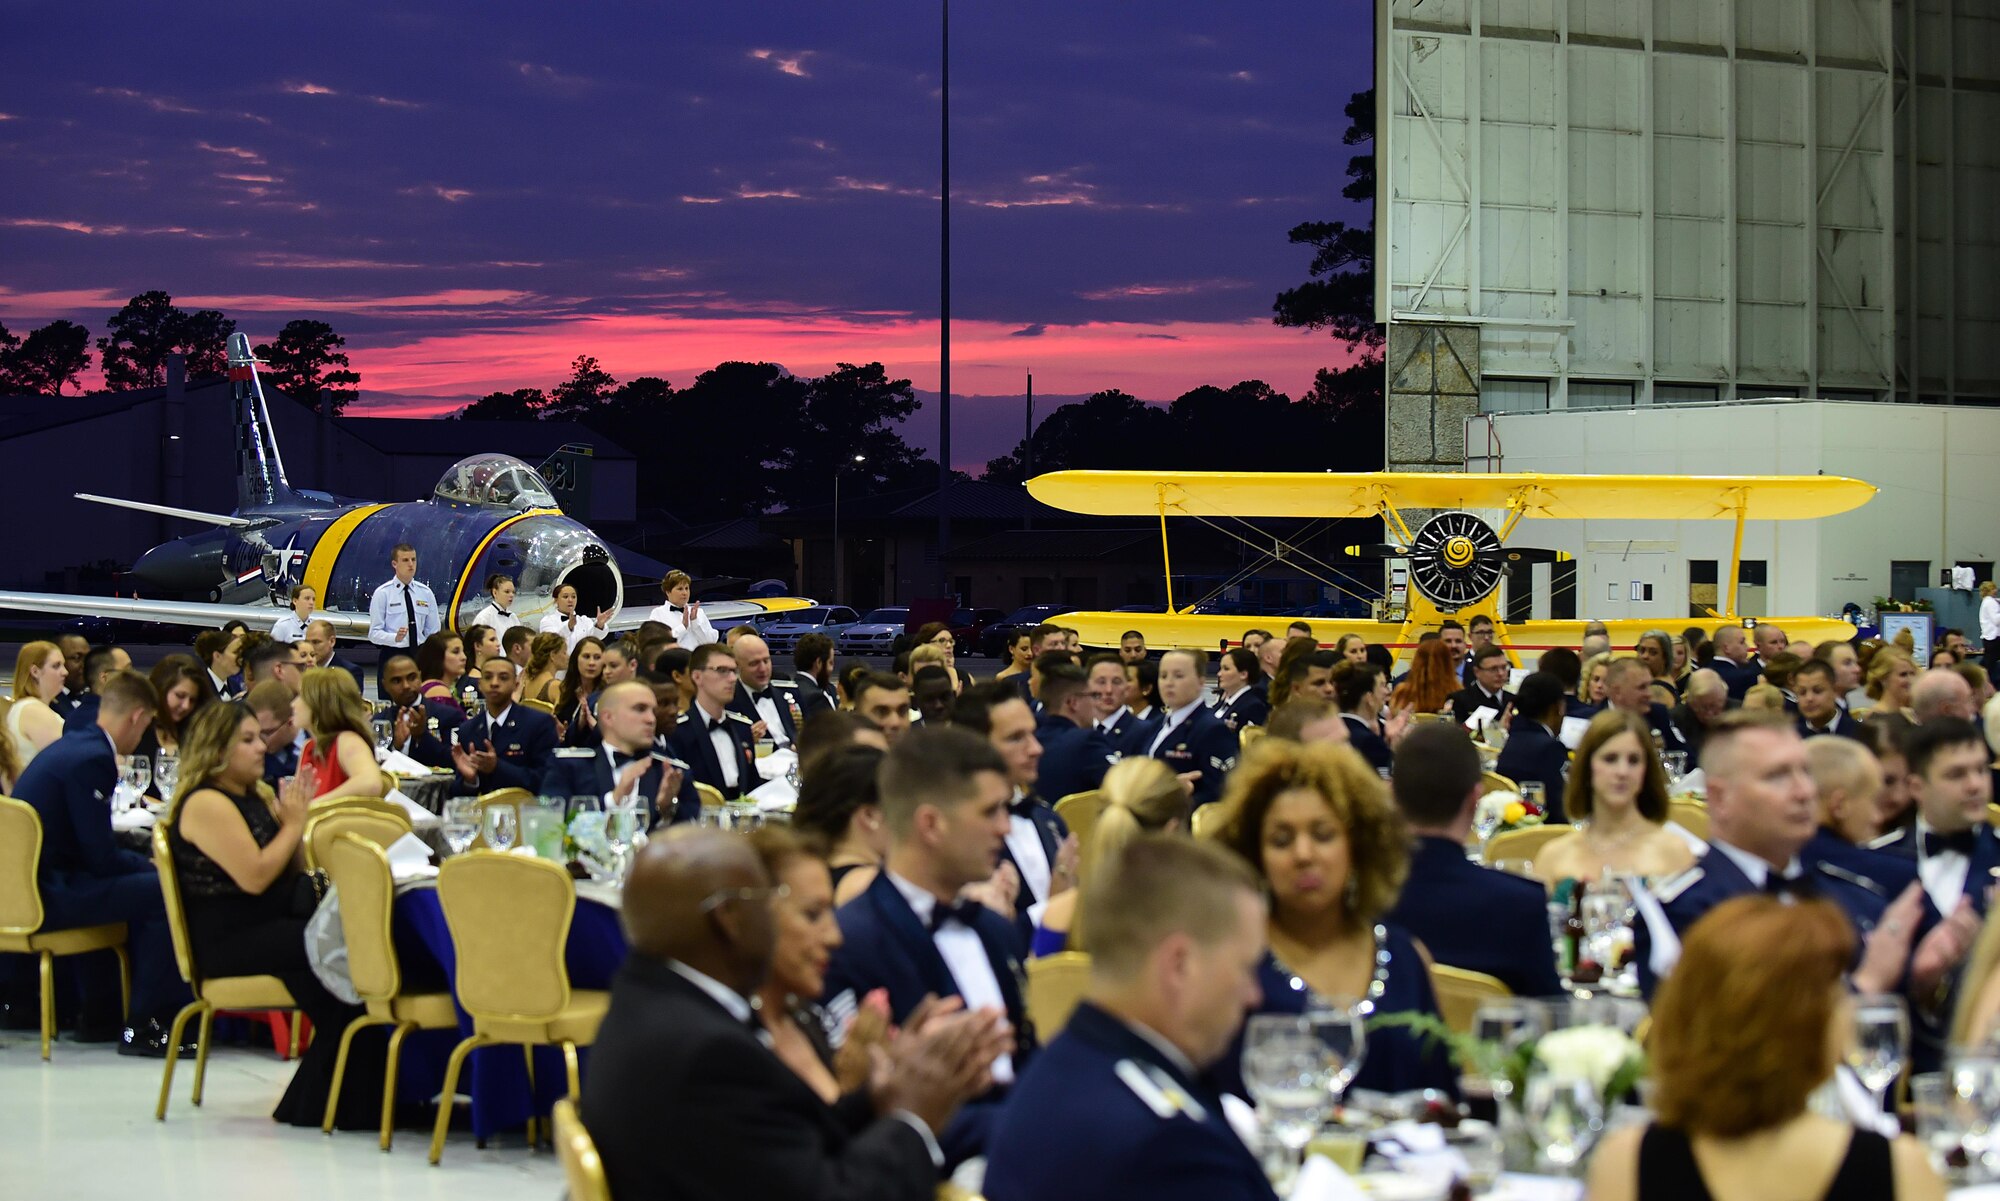 Members from Team Seymour and other distinguished visitors attend the 4th Fighter Wing 75th Anniversary Gala, Sept. 16, 2017, at Seymour Johnson Air Force Base, North Carolina. Some distinguished visitors included former 4 FW commanders, Brig. Gen. Mark Slocum, United States Air Forces in Europe-United Kingdom director, and Gen. Mike Holmes, Air Combat Command commander. (U.S. Air Force photo by Airman 1st Class Kenneth Boyton)